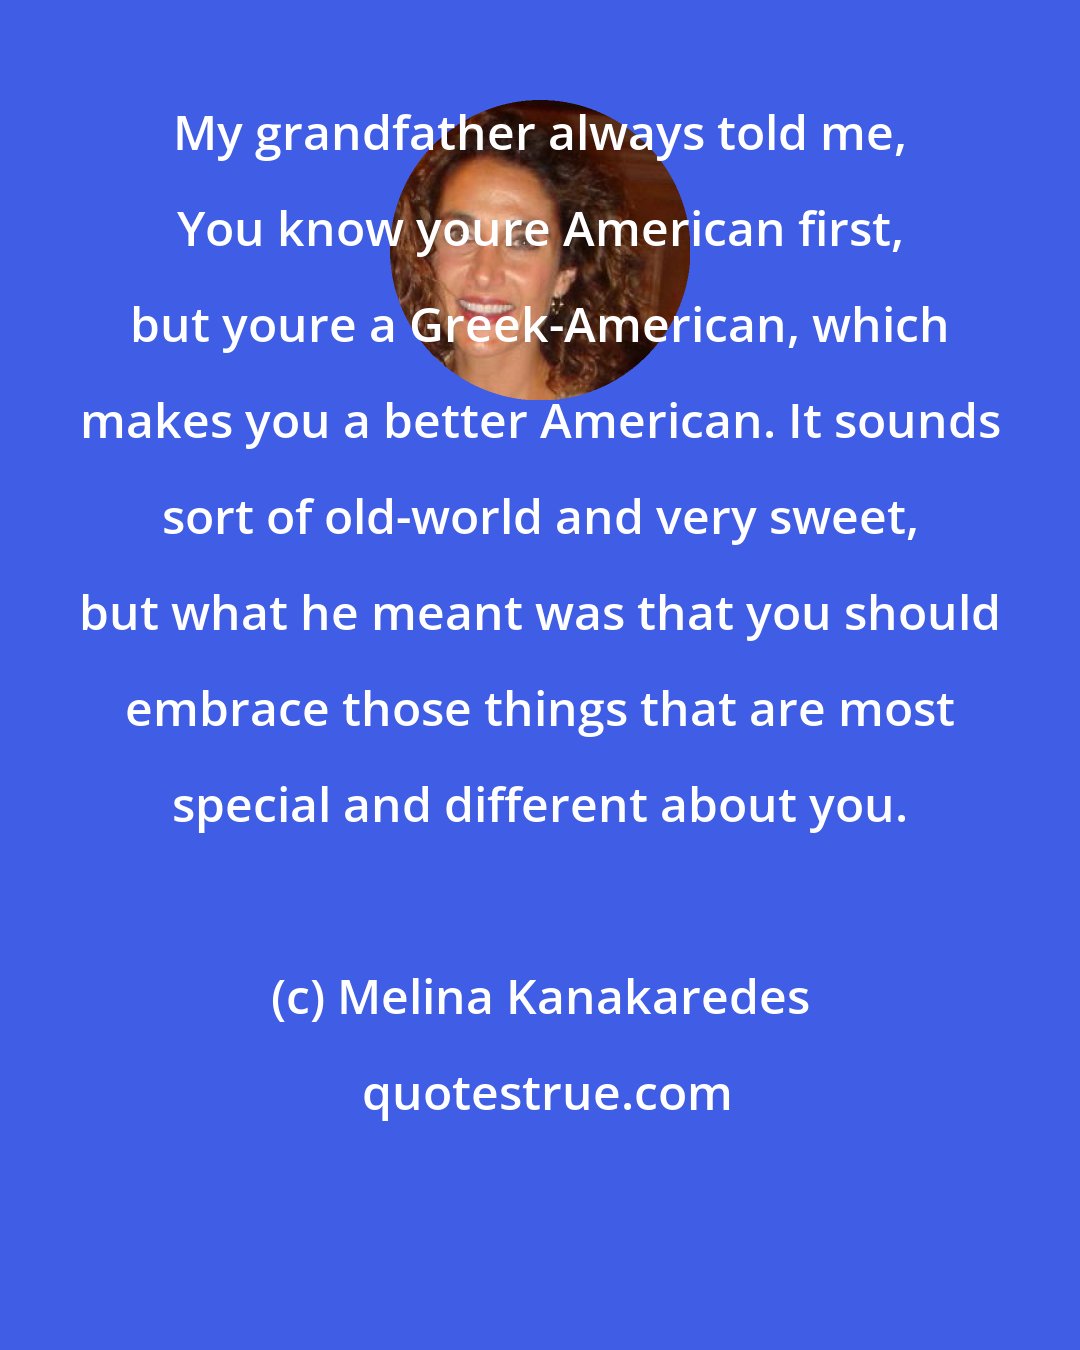 Melina Kanakaredes: My grandfather always told me, You know youre American first, but youre a Greek-American, which makes you a better American. It sounds sort of old-world and very sweet, but what he meant was that you should embrace those things that are most special and different about you.